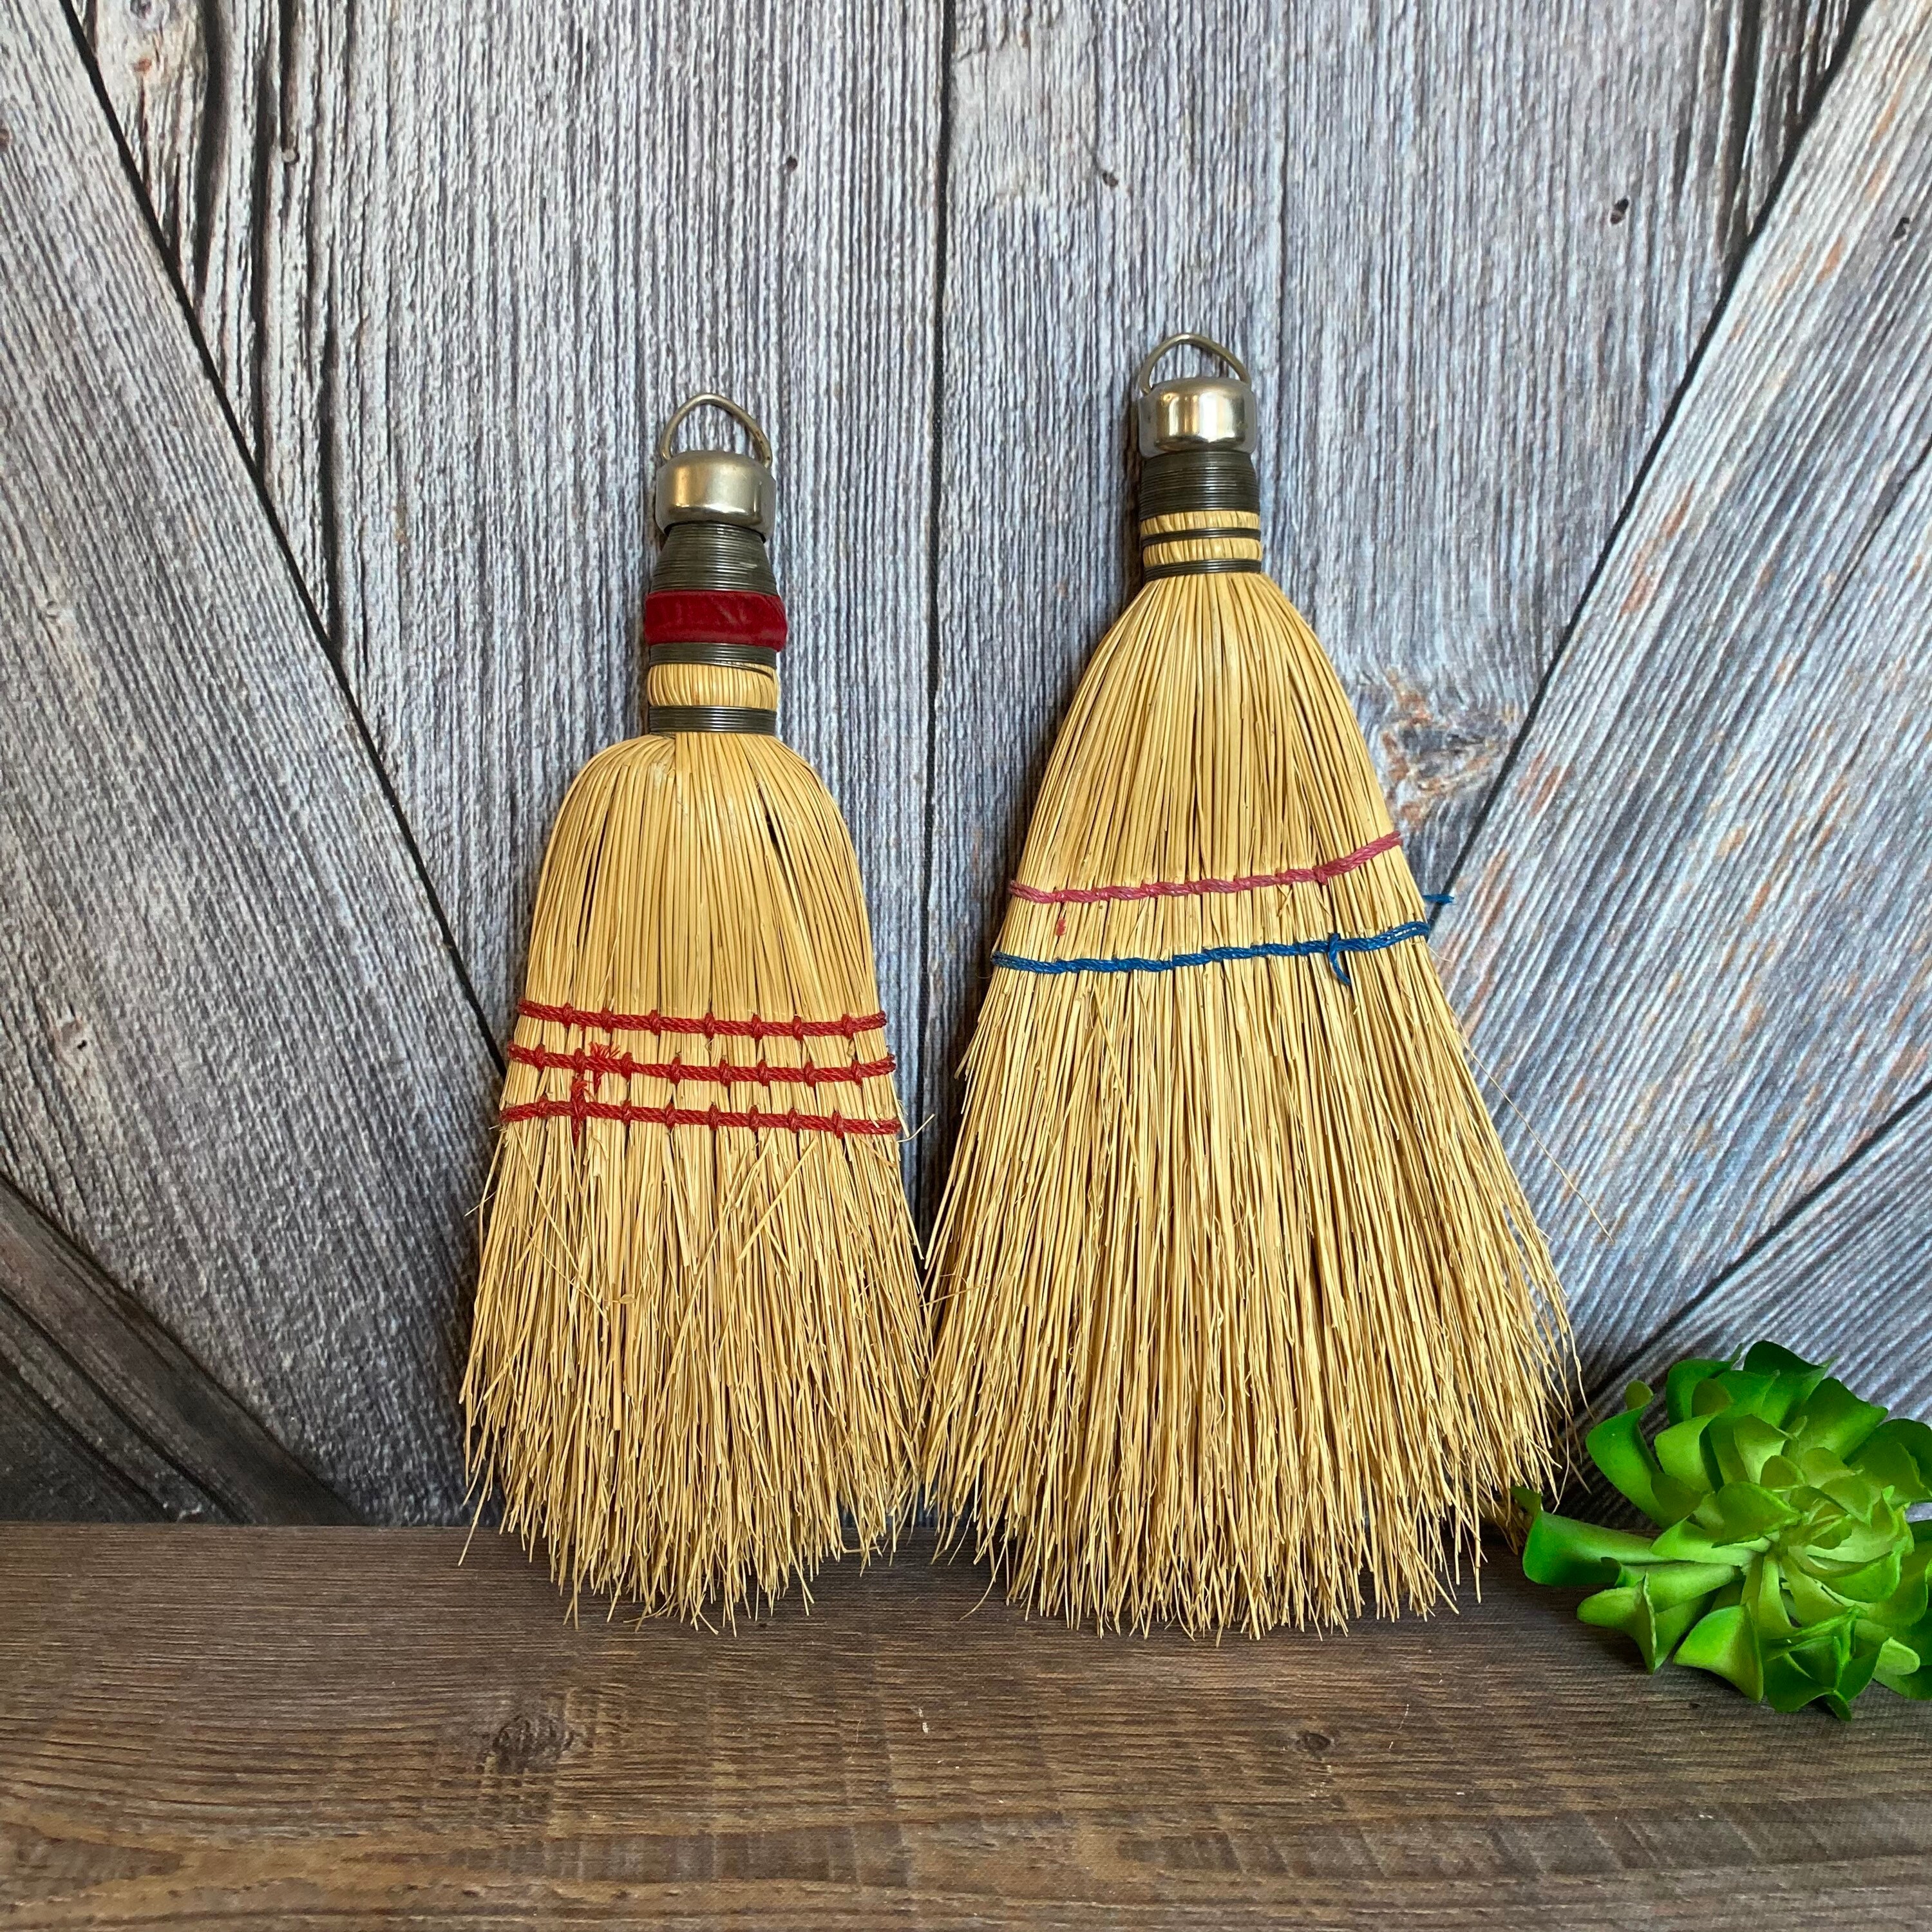 Small Plastic Whisk Broom / Vintage Cleaning Tool / Retro Garage